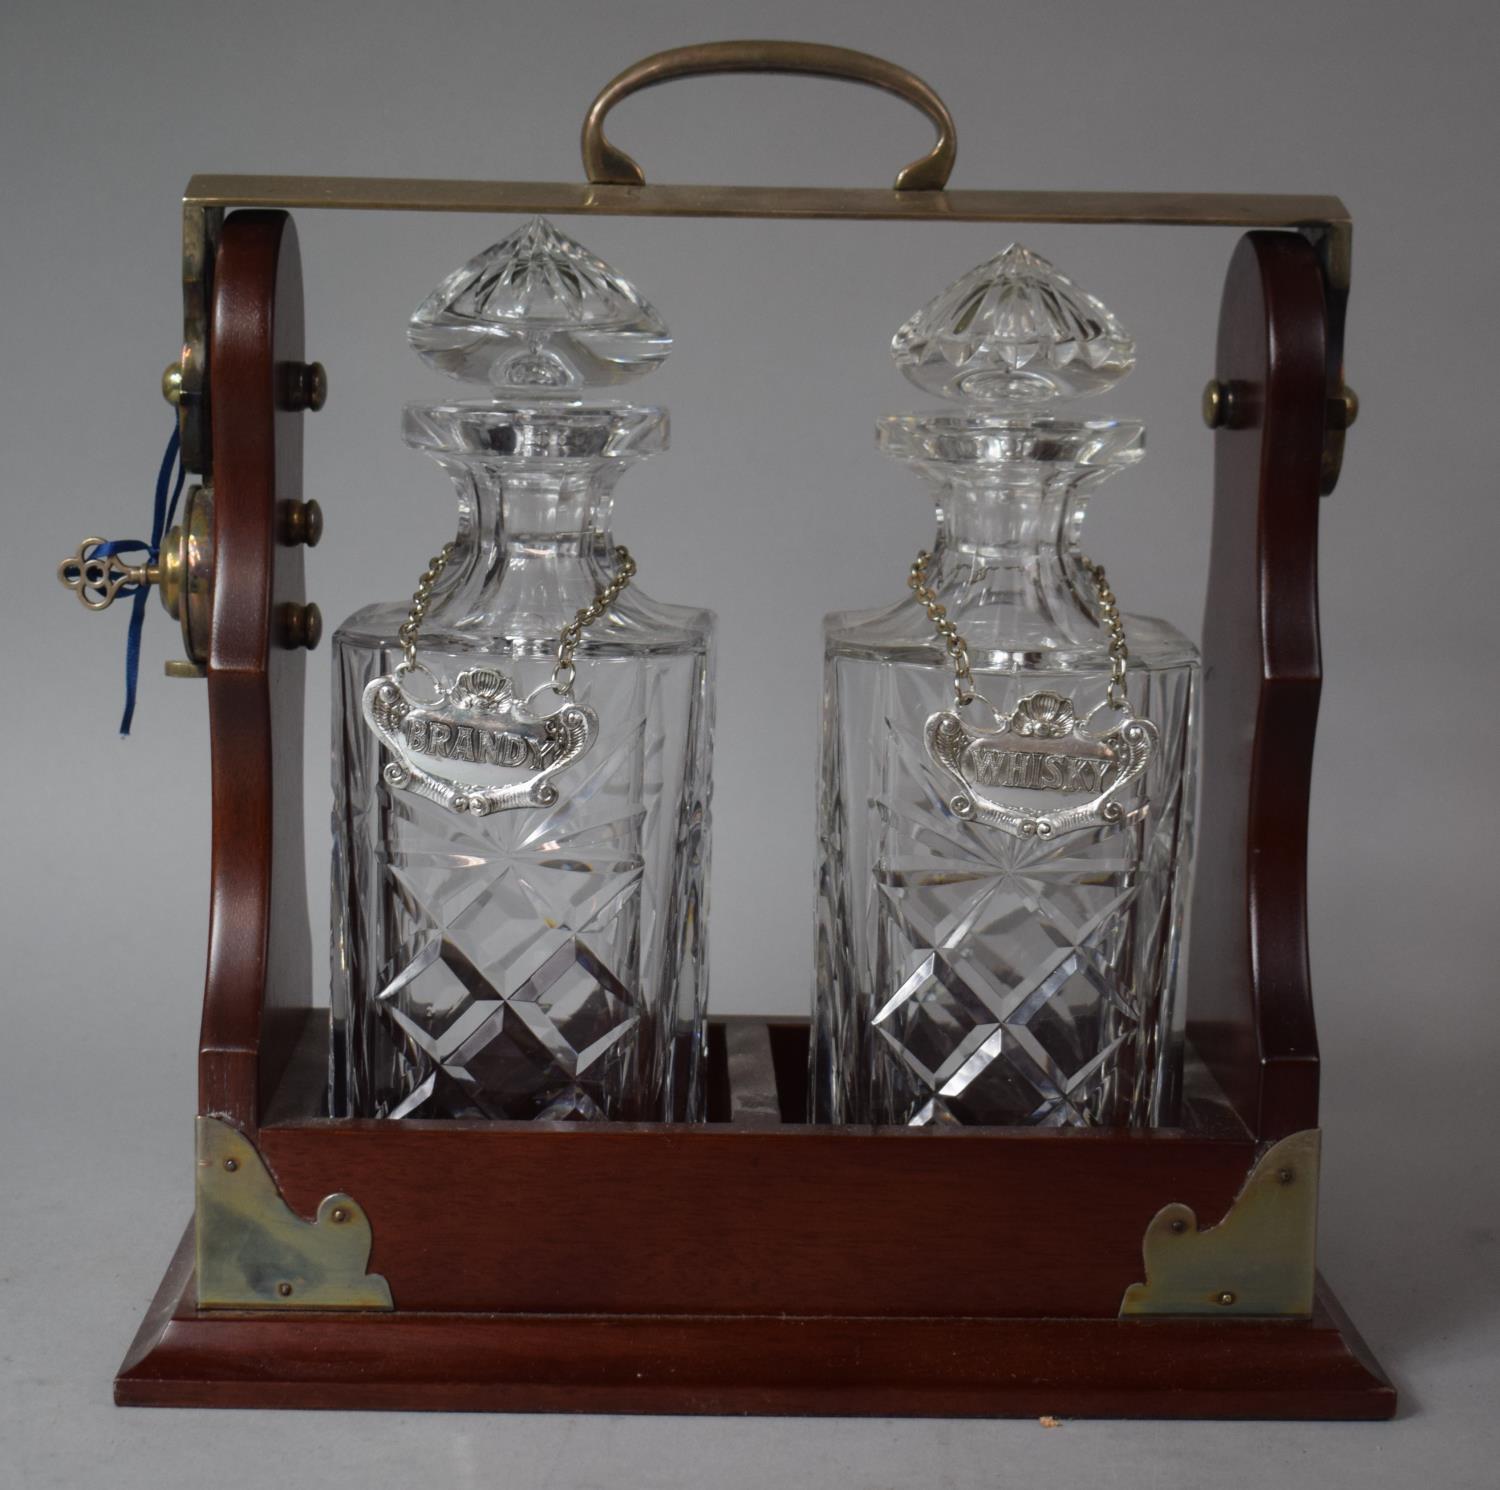 A Reproduction Silver Plate Mounted Two Bottle Tantalus with Whisky and Brandy Decanter Labels